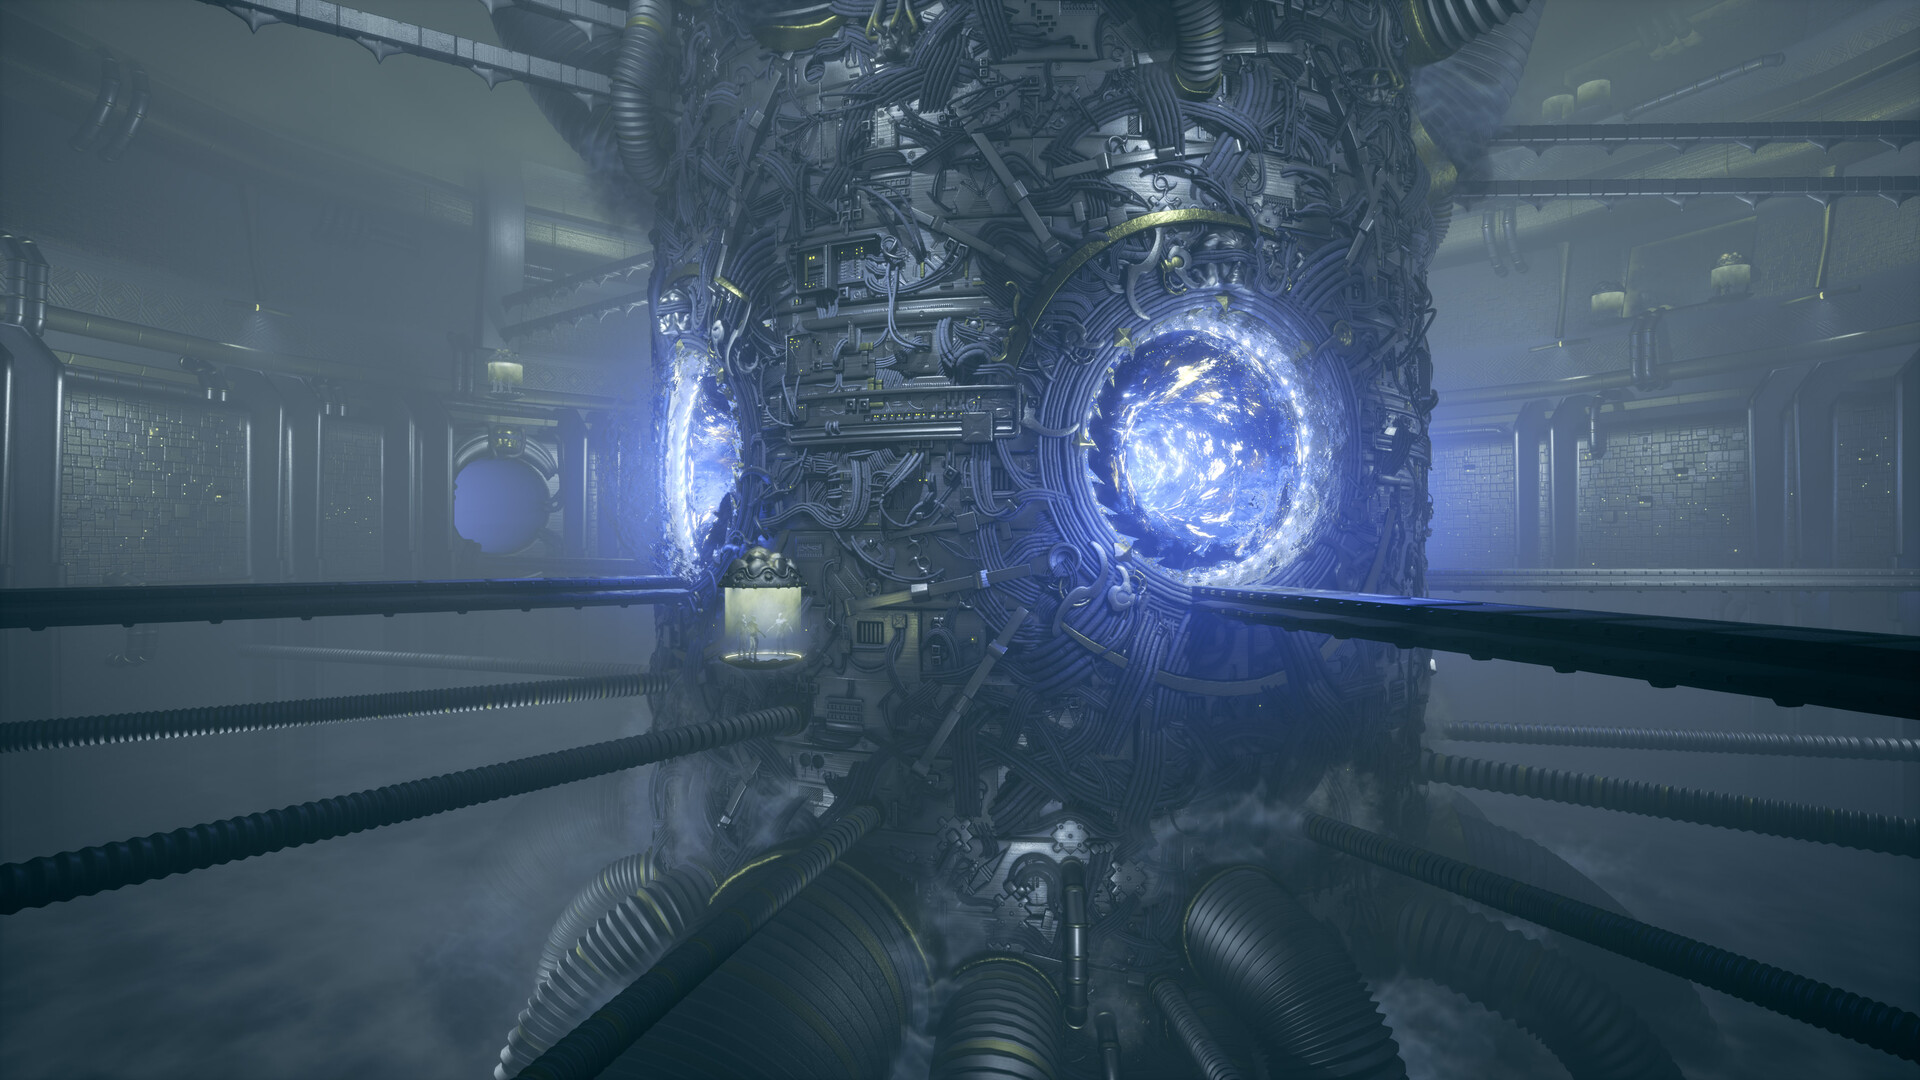 Main camera angle screenshot. The cylindrical portal megastructure. Colors are refined and the background has a bit more detail in the likes of chrome and gold, large pipes.